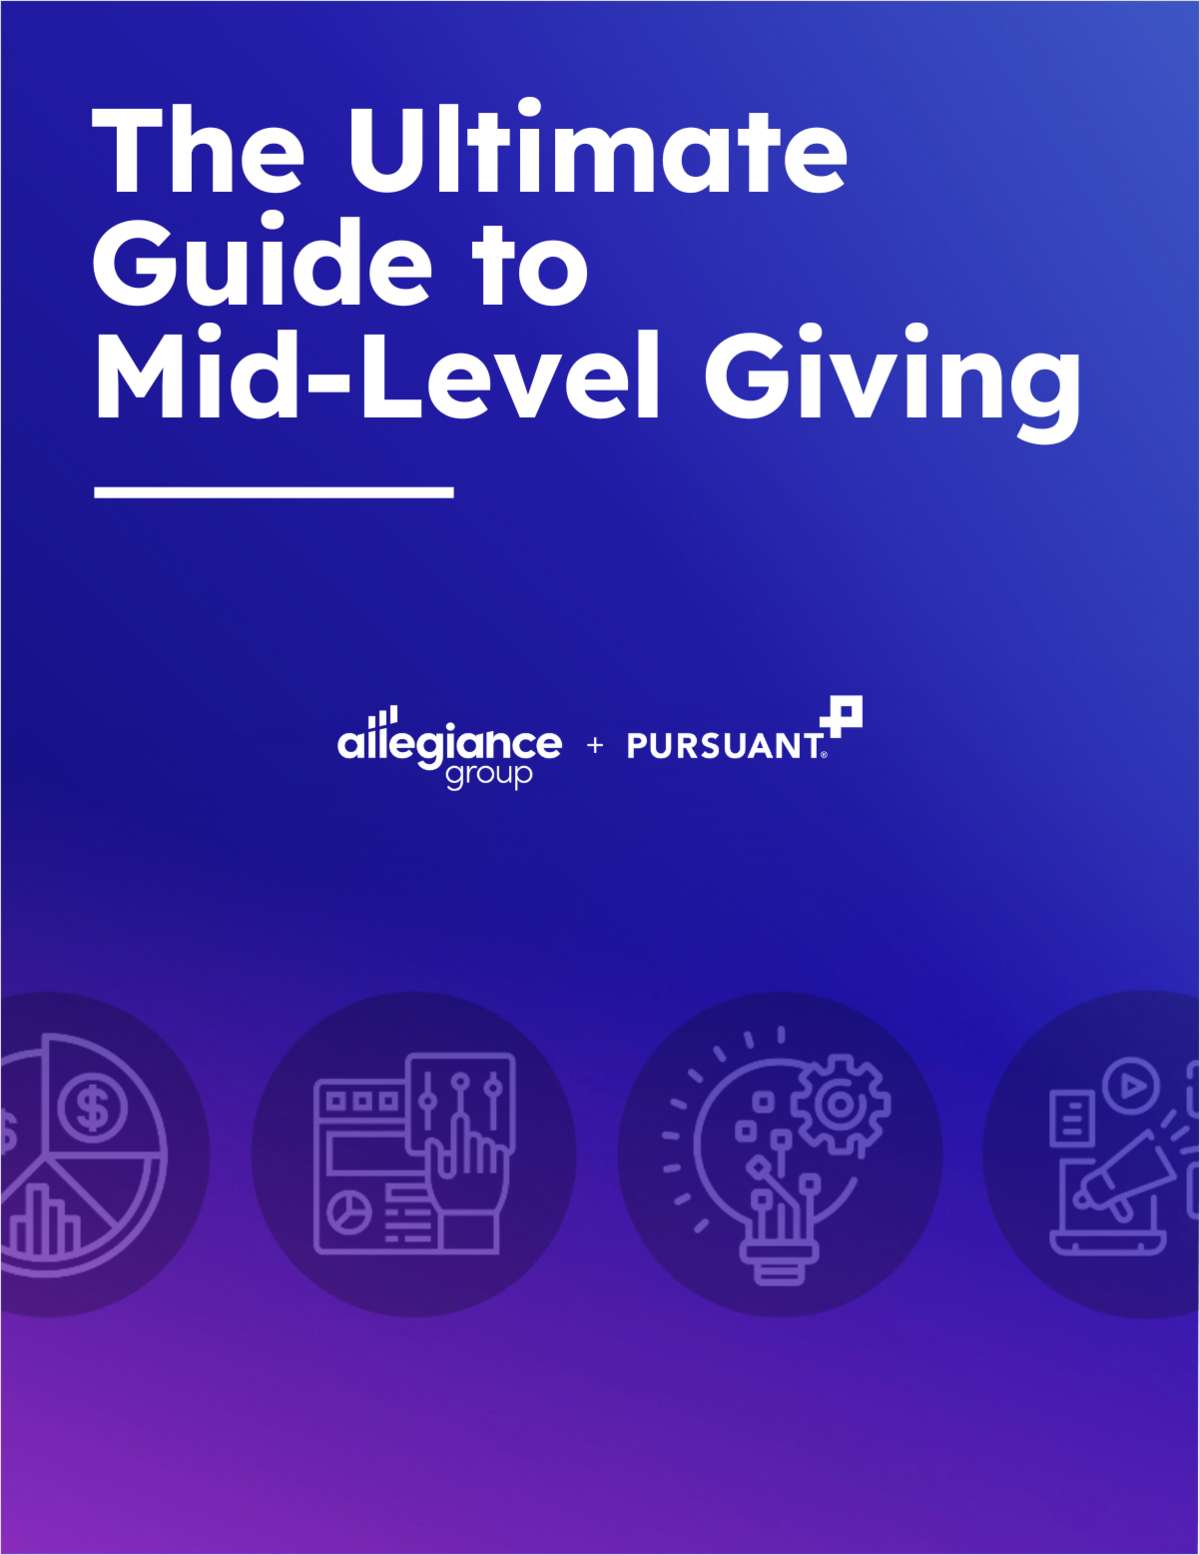 The Ultimate Guide to Mid-Level Giving